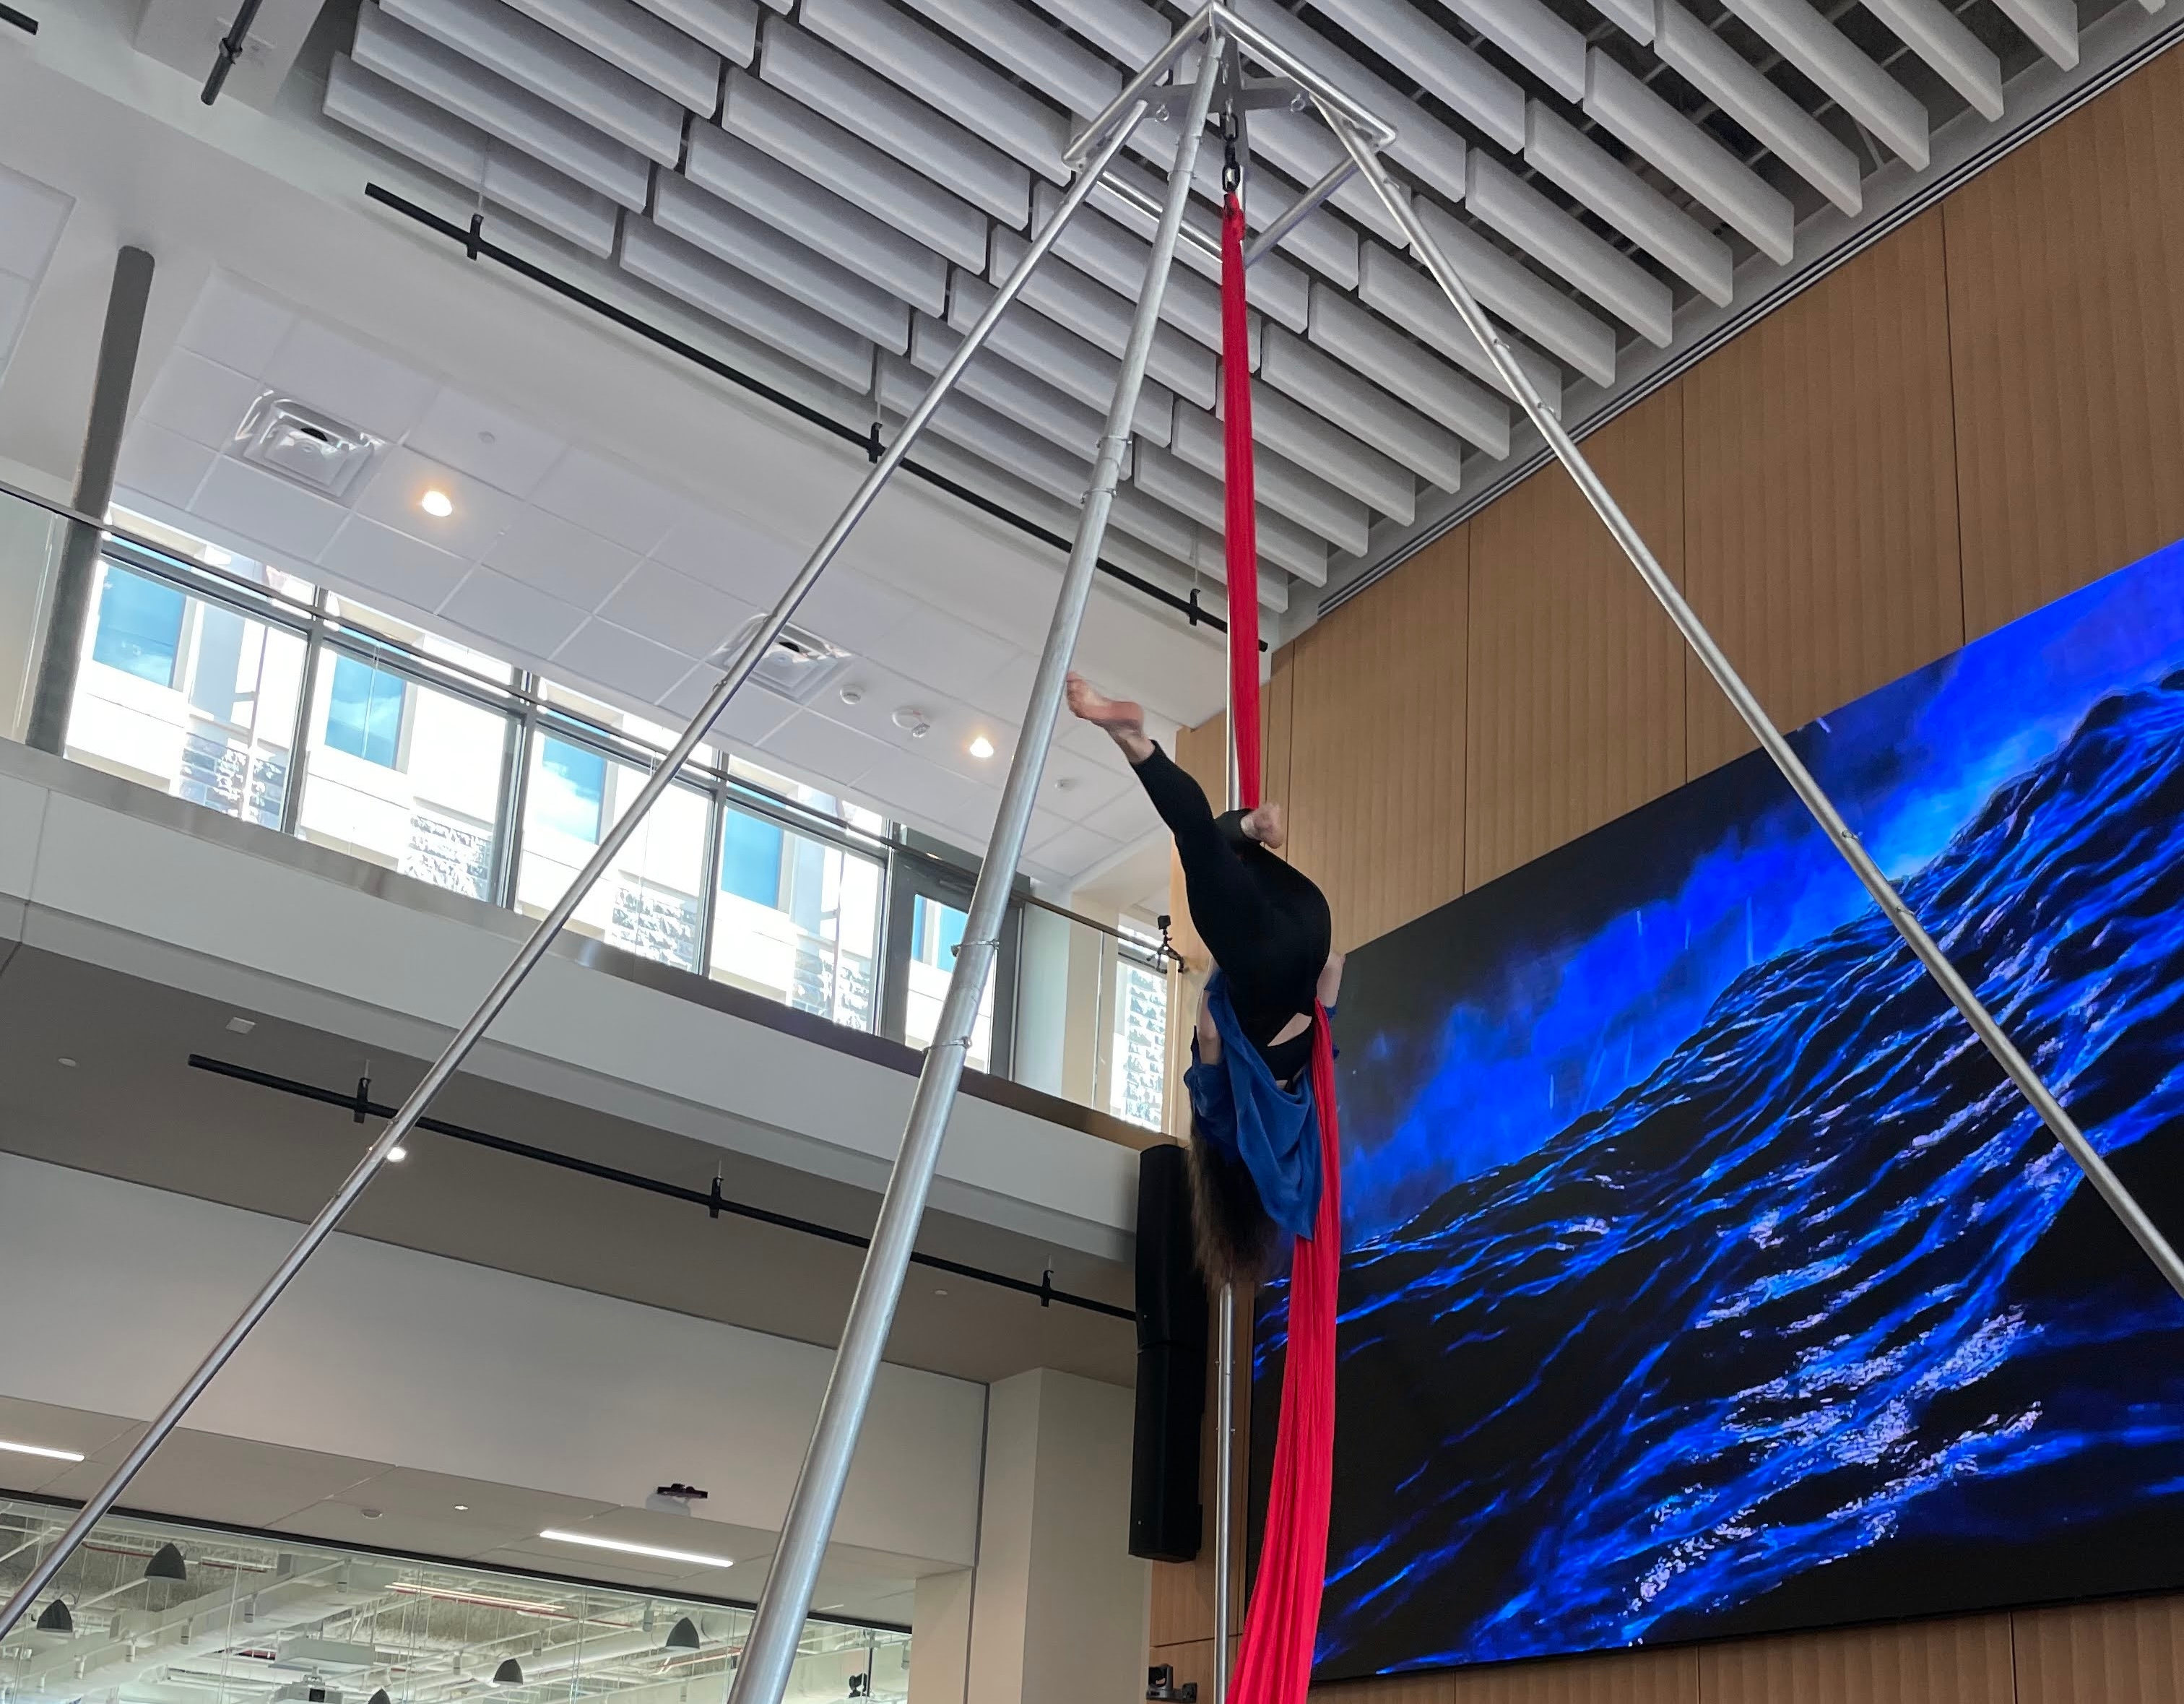 A young woman in blue and black performs aerial acrobatics on red silks with a blue background.